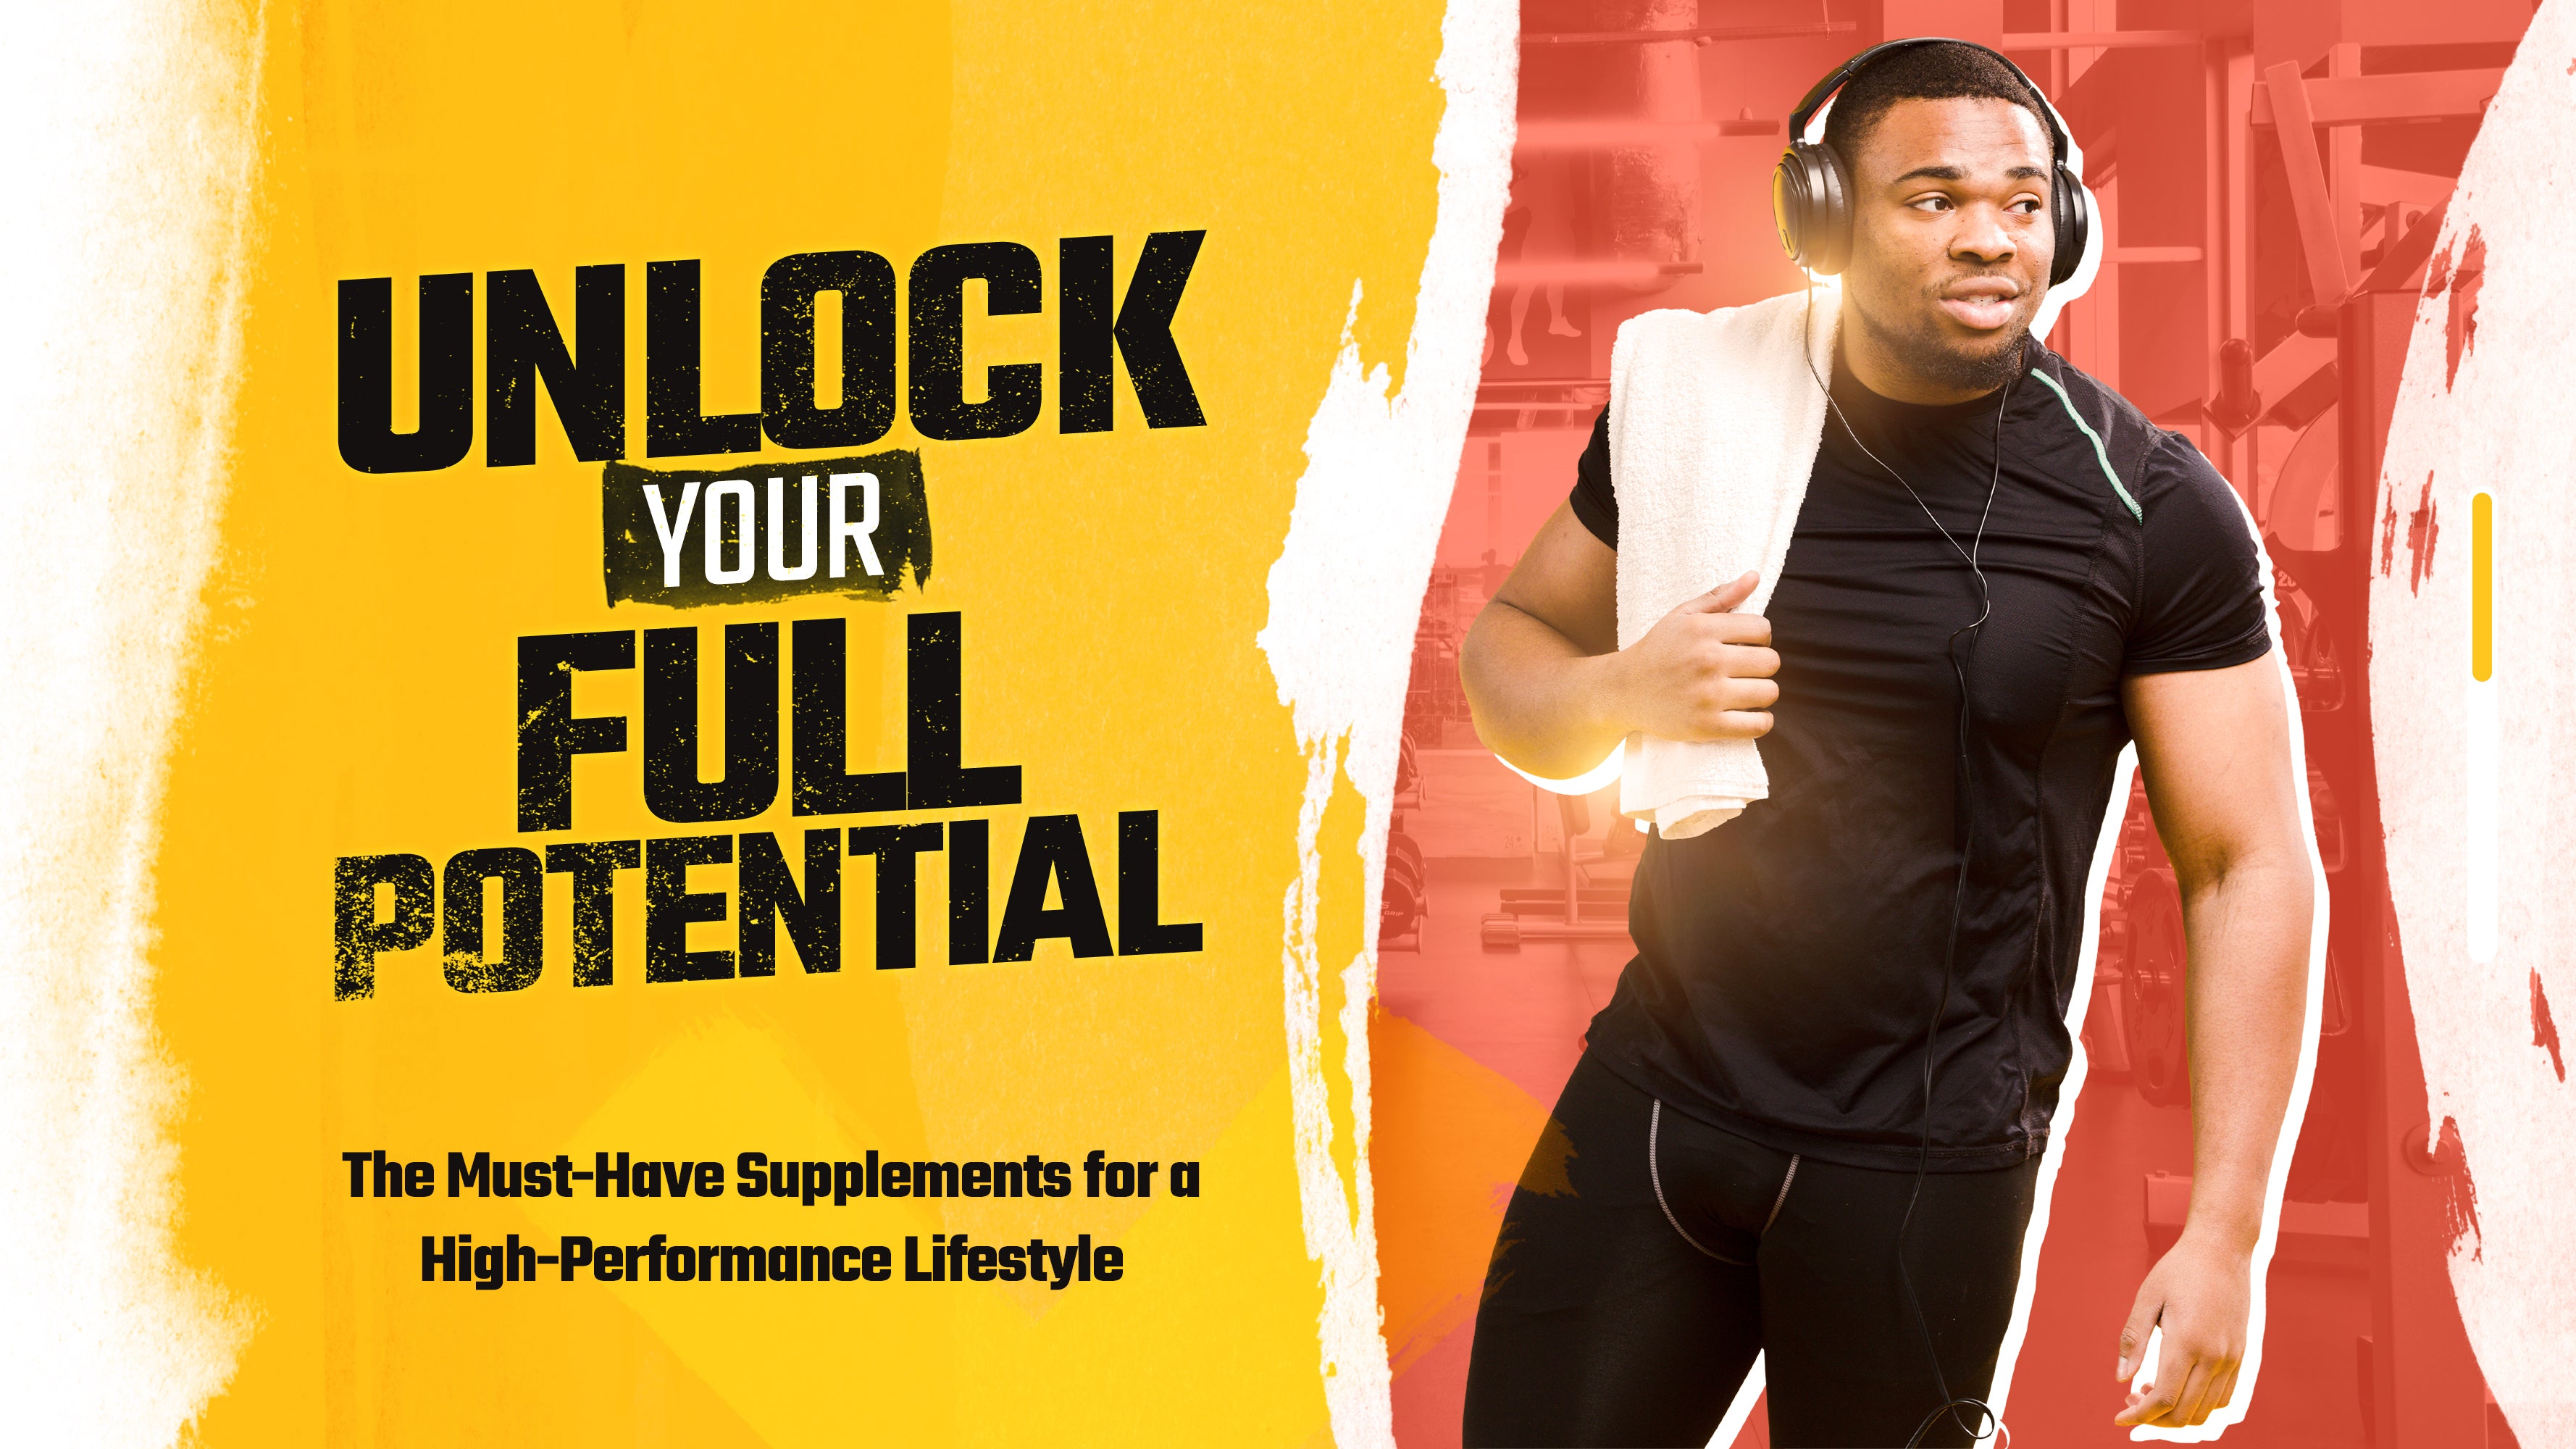 Unlock Your Full Potential: The Must-Have Supplements for a High-Performance Lifestyle